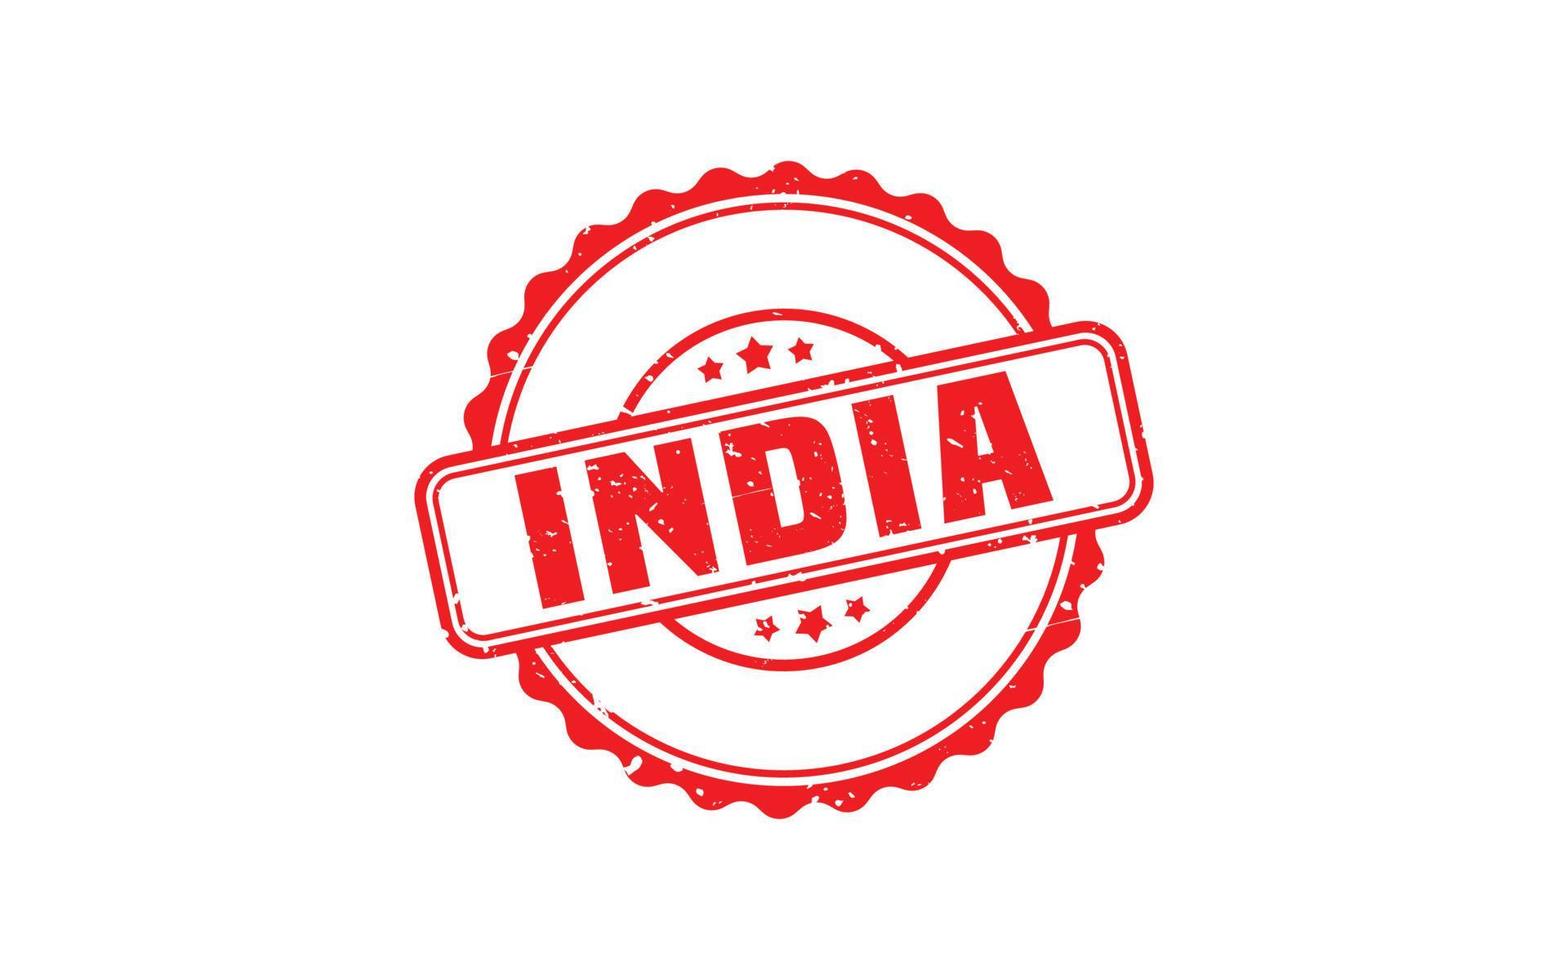 INDIA stamp rubber with grunge style on white background vector